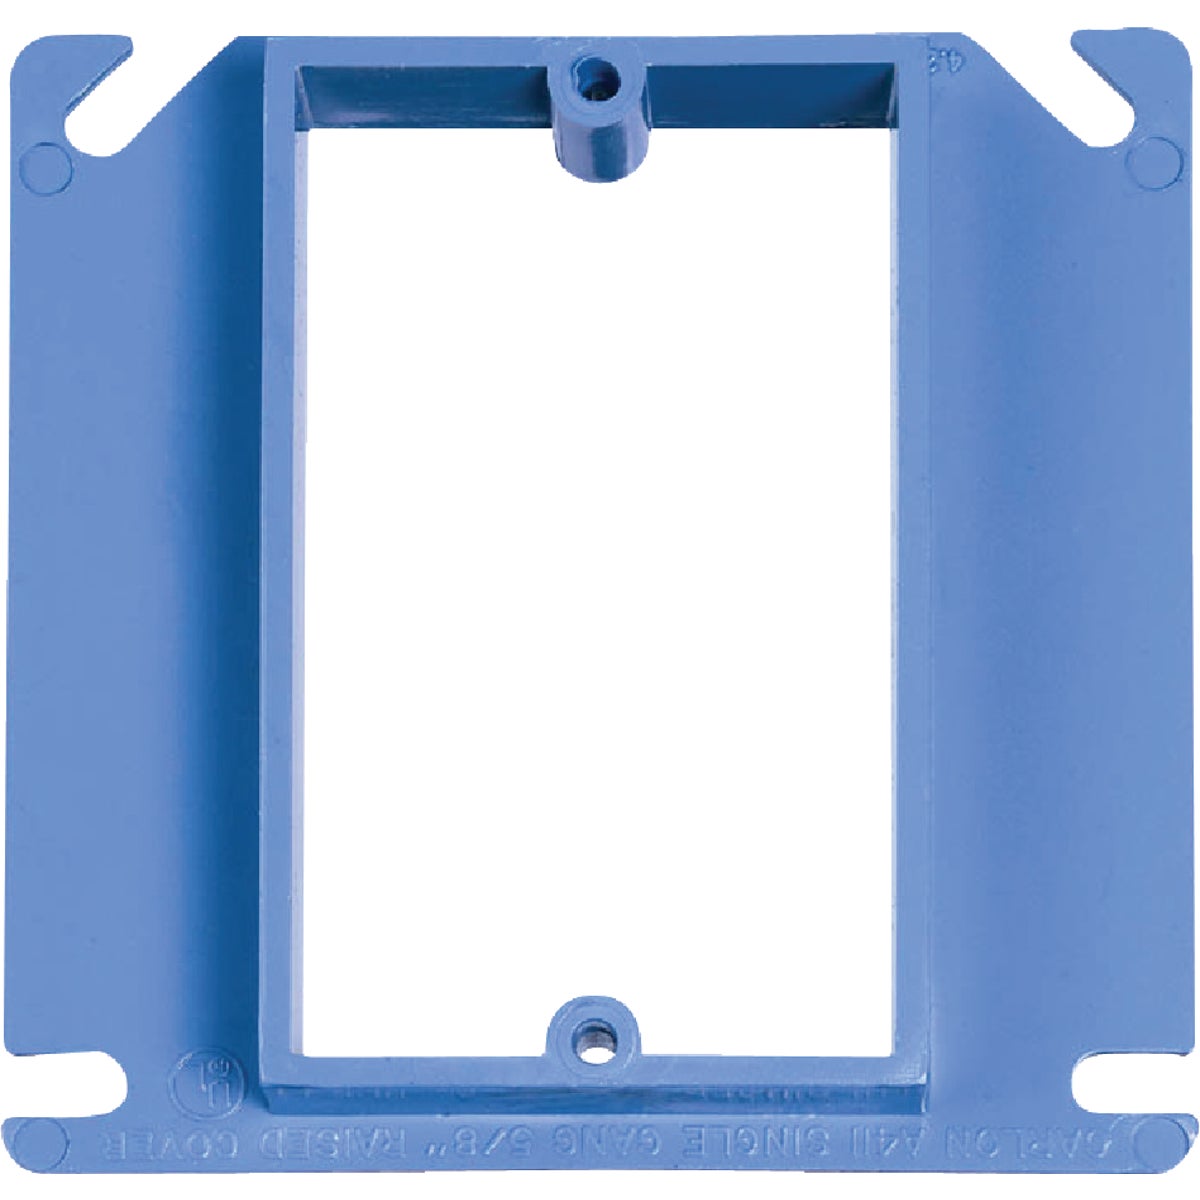 Item 540277, PVC, 4-inch square, single gang cover. 5/8-inch rise.